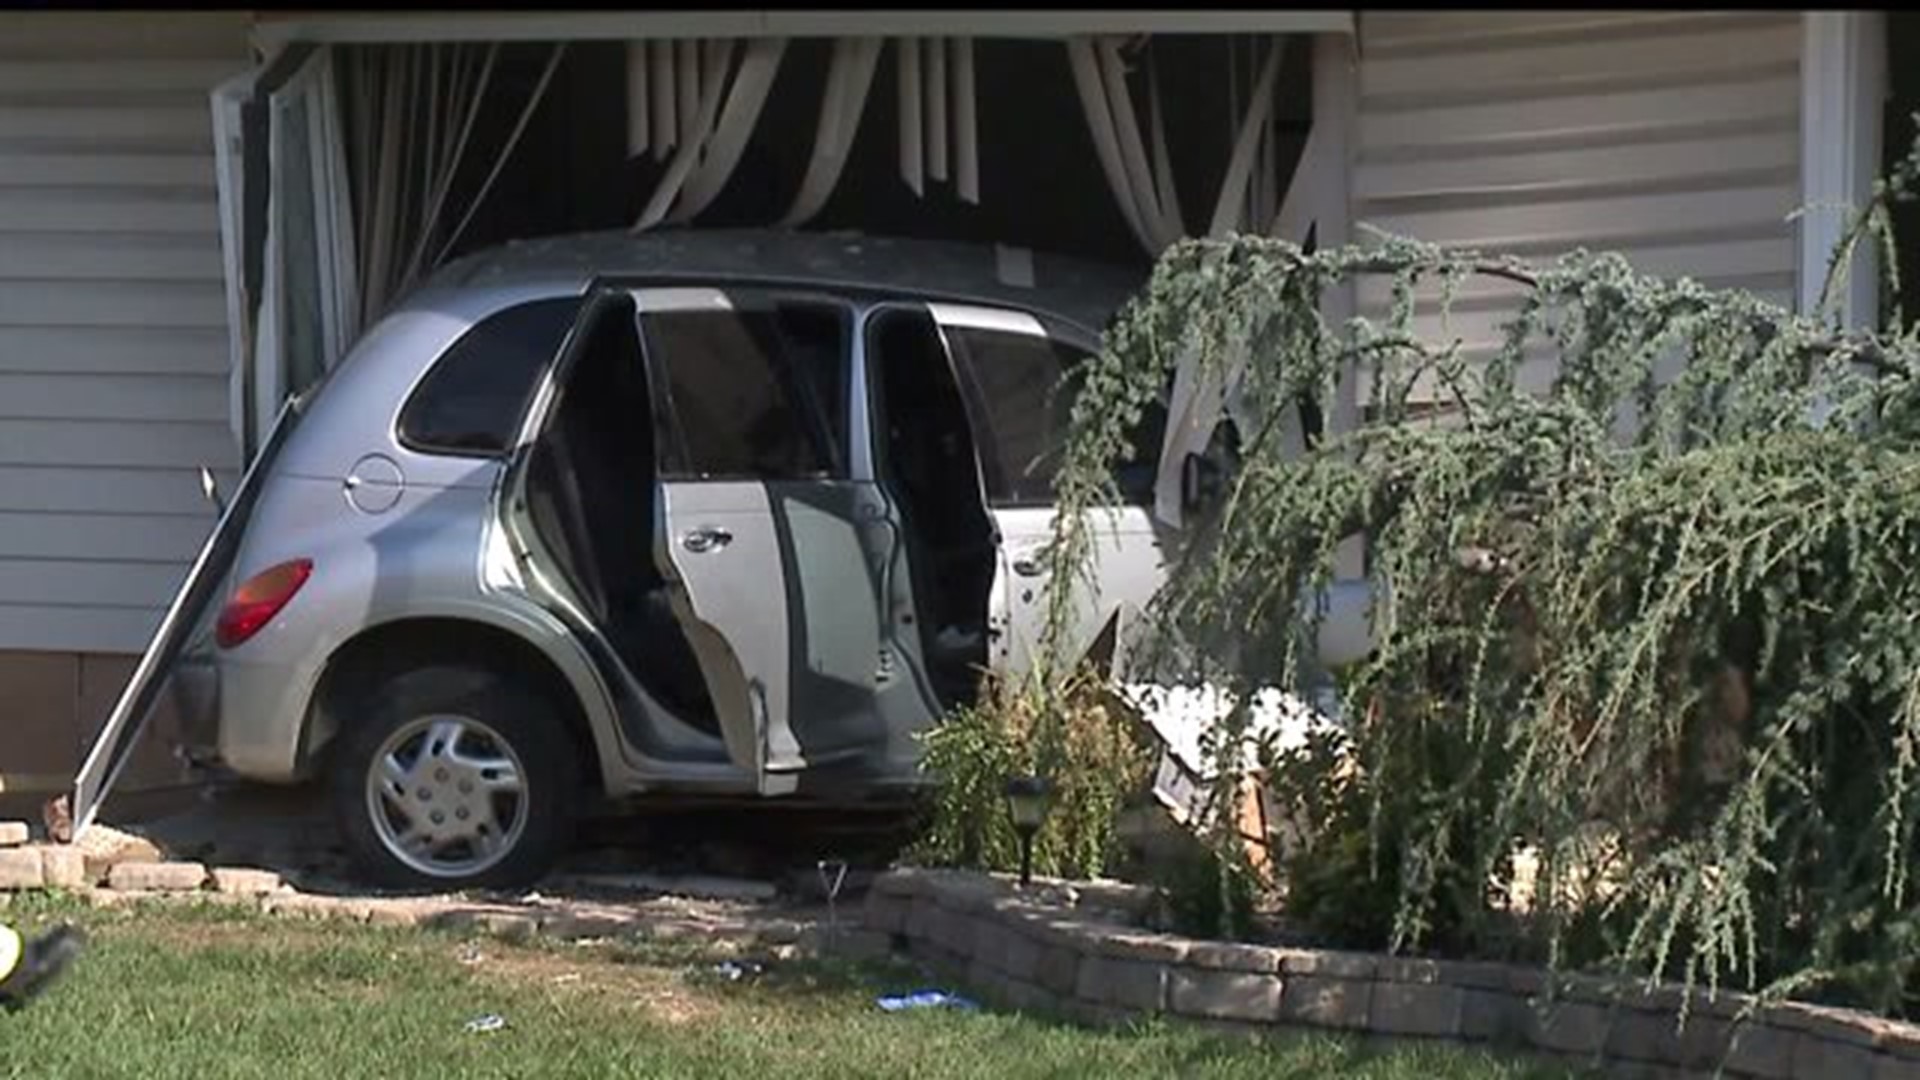 One man hospitalized after car slams into a house in York County